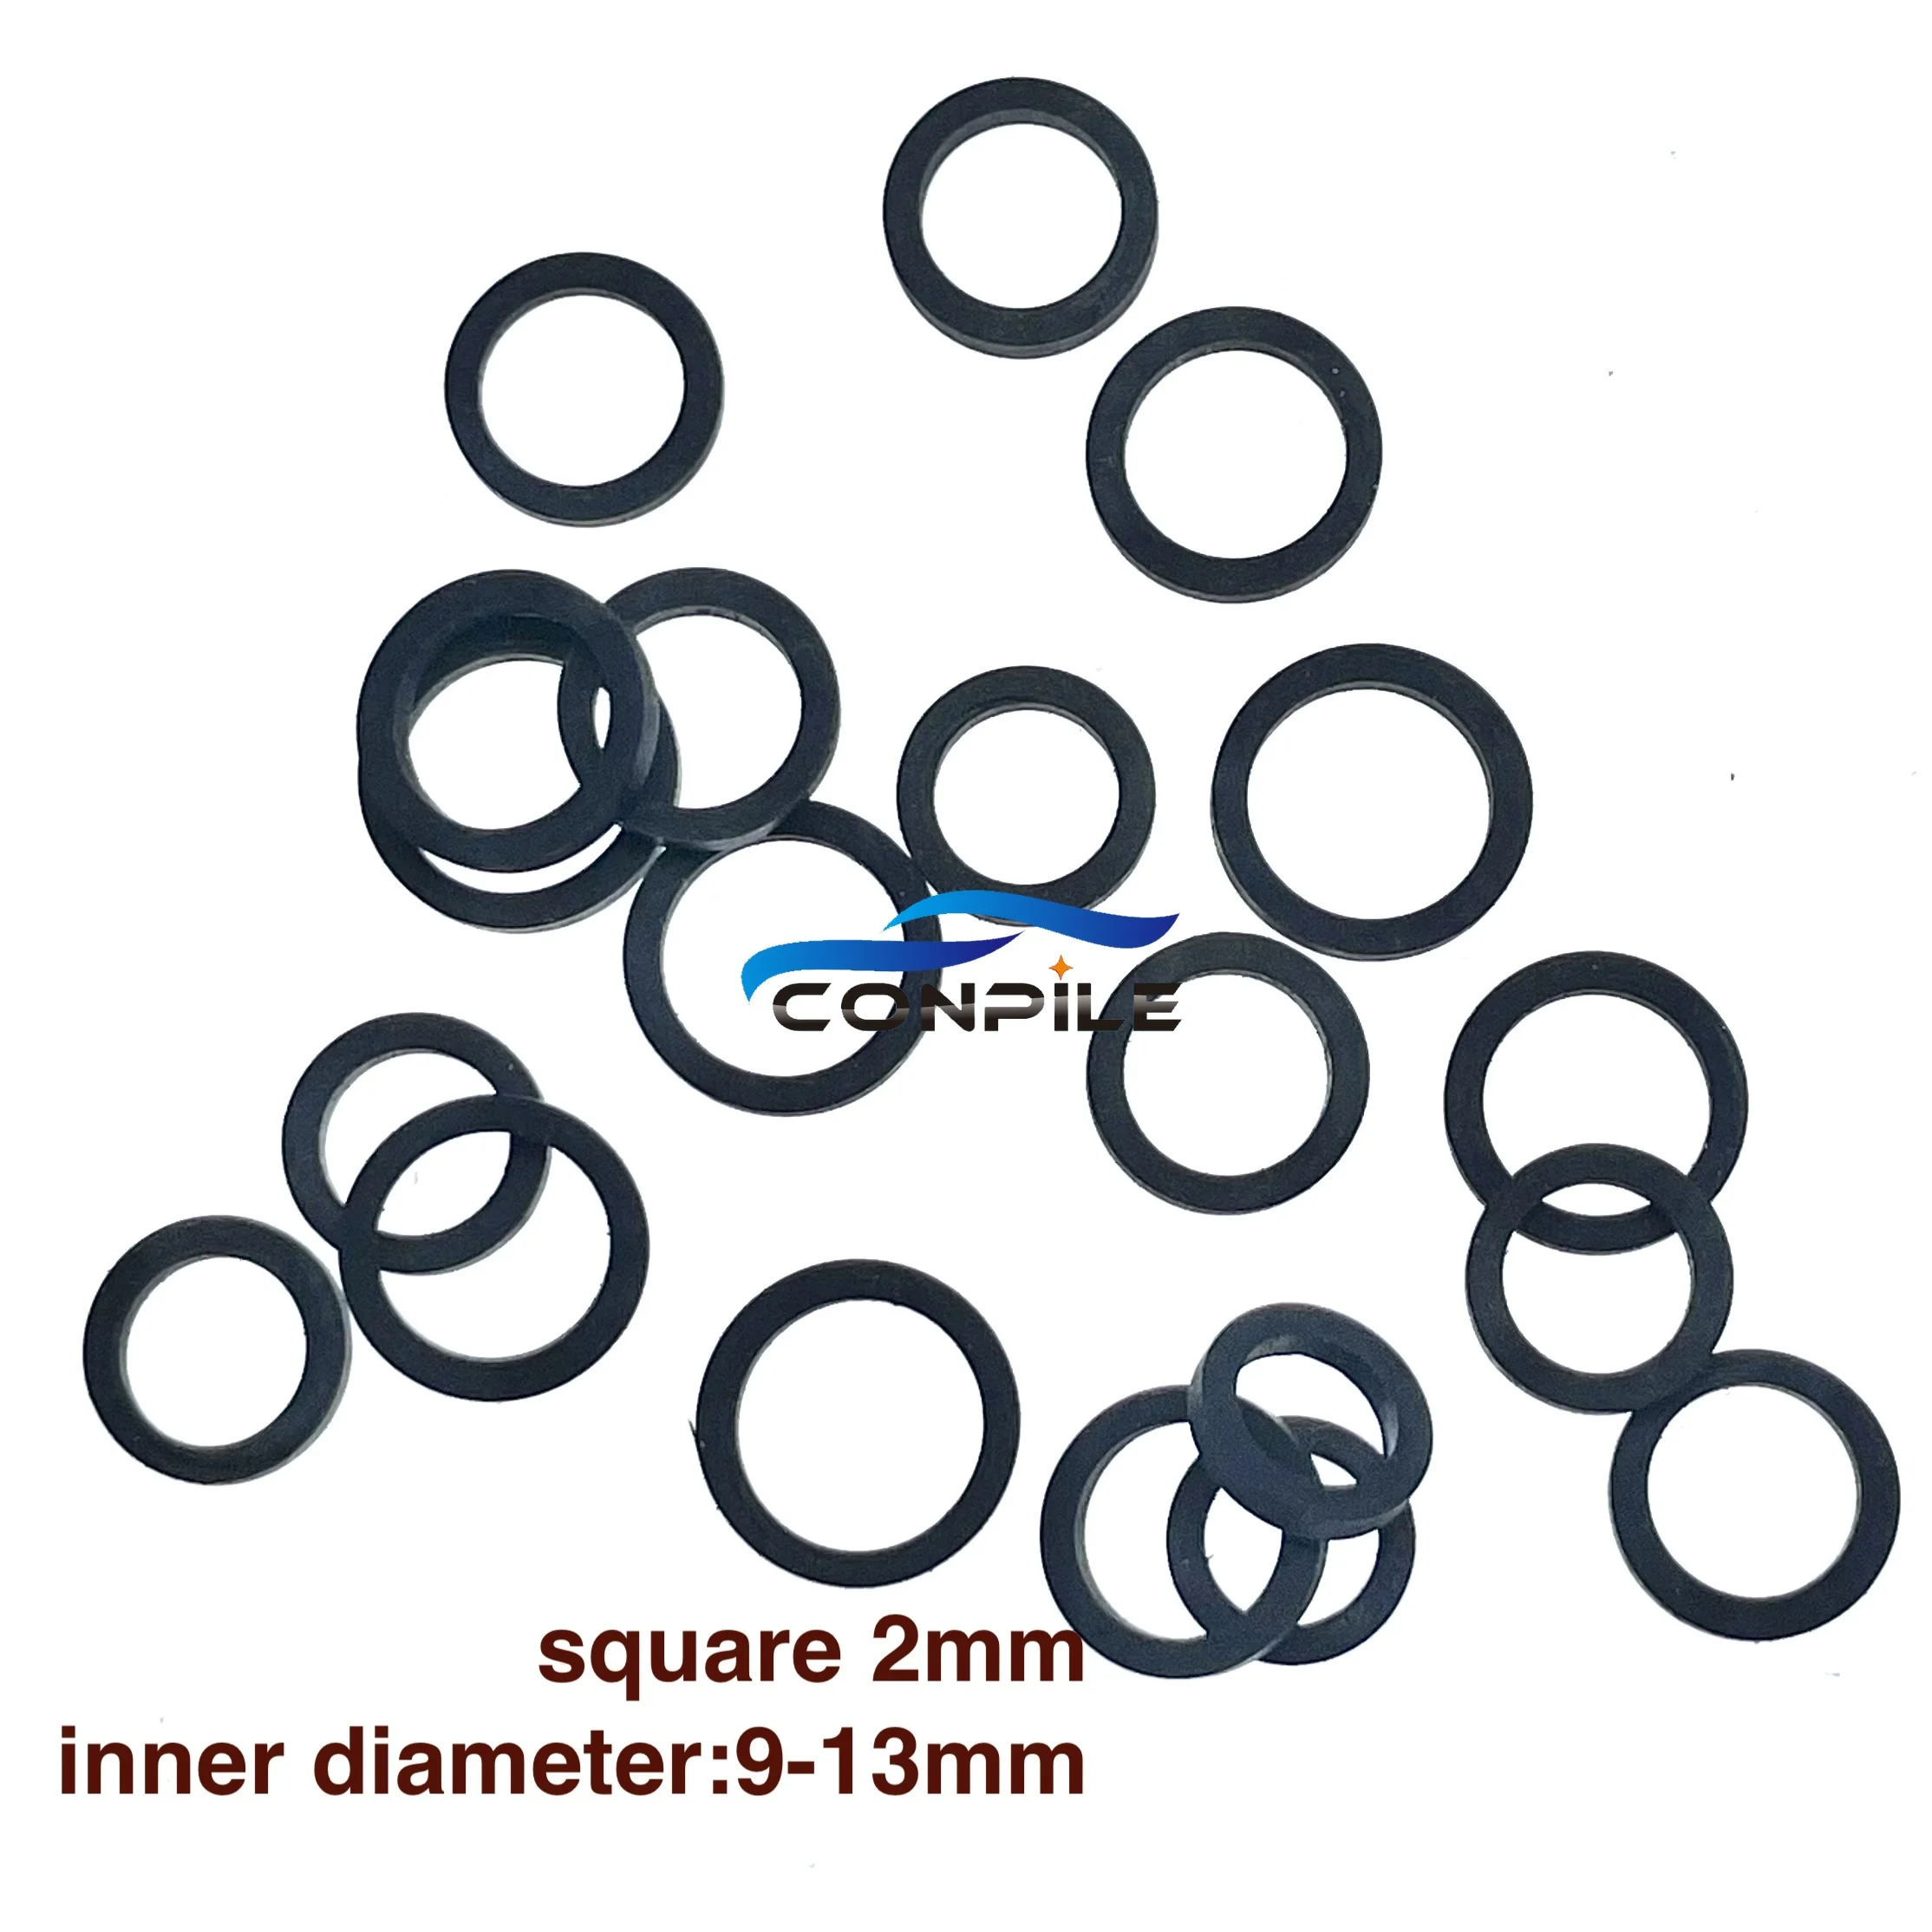 20pcs mixed square 2mm idle tire wheel belt loop Idler rubber ring for cassette deck recorder tape stereo audio player